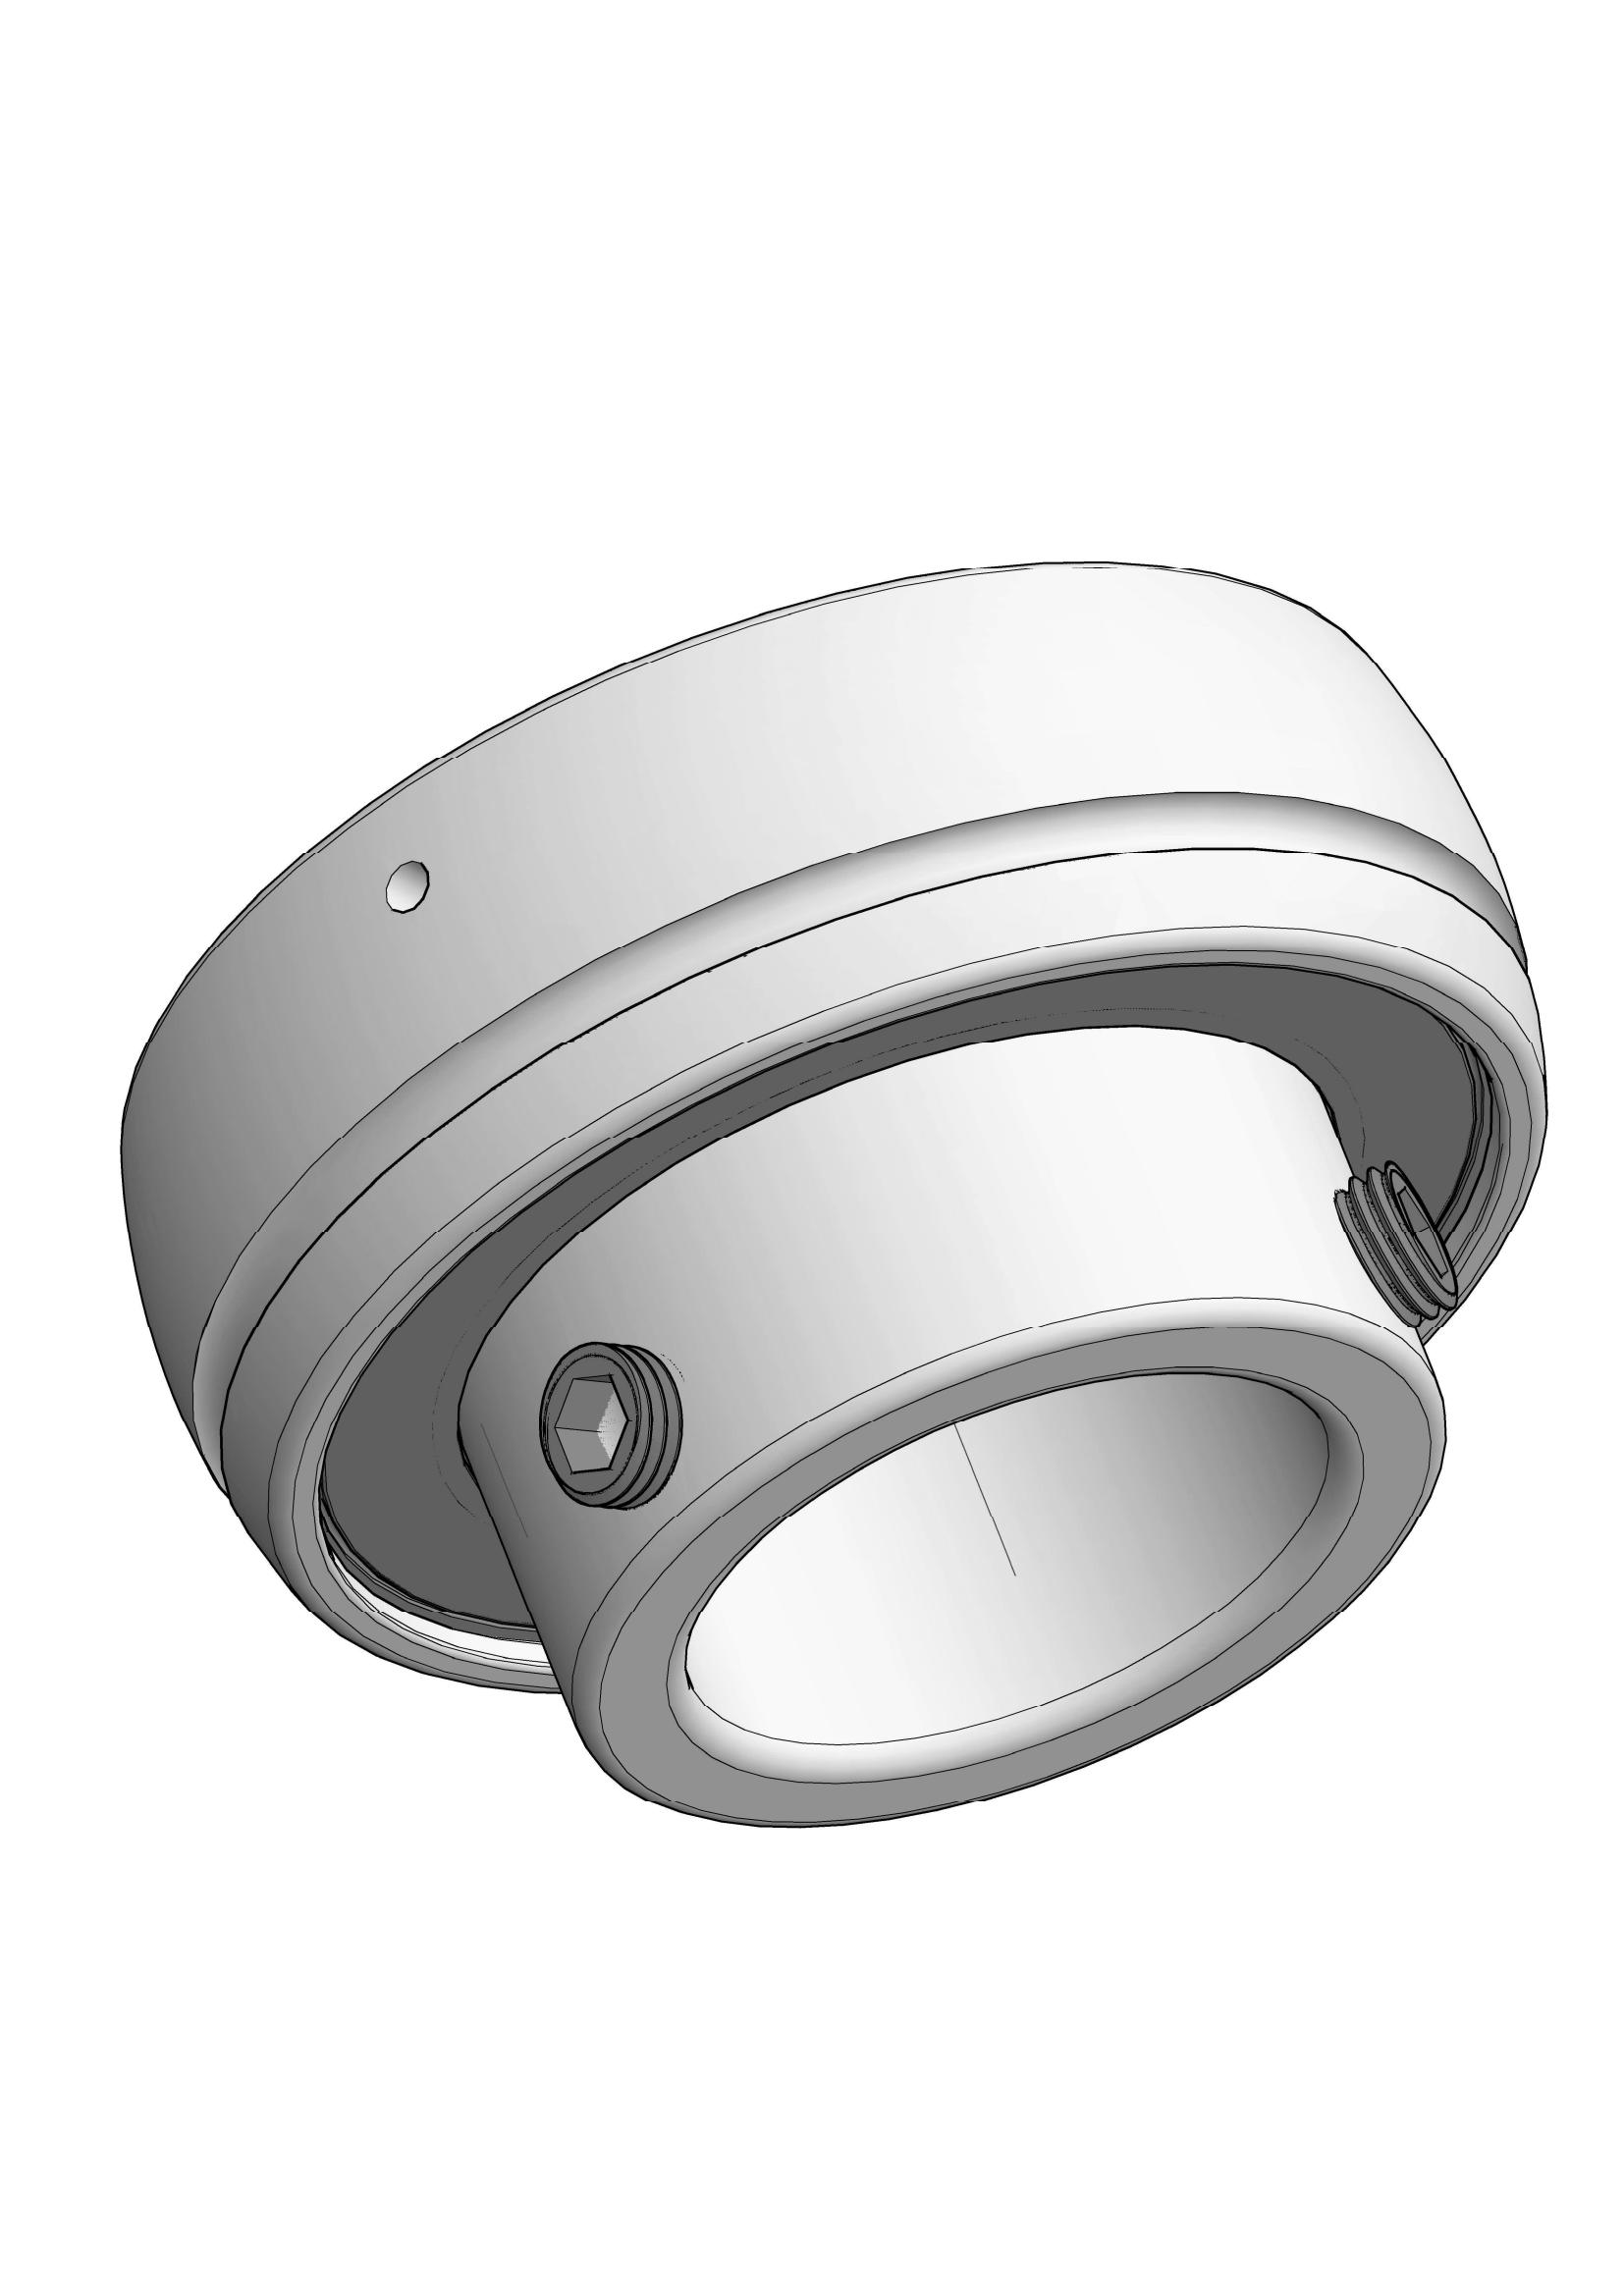 SB204-12 insert ball bearings with Eccentric Collar Lock with 3/4 inch Bore